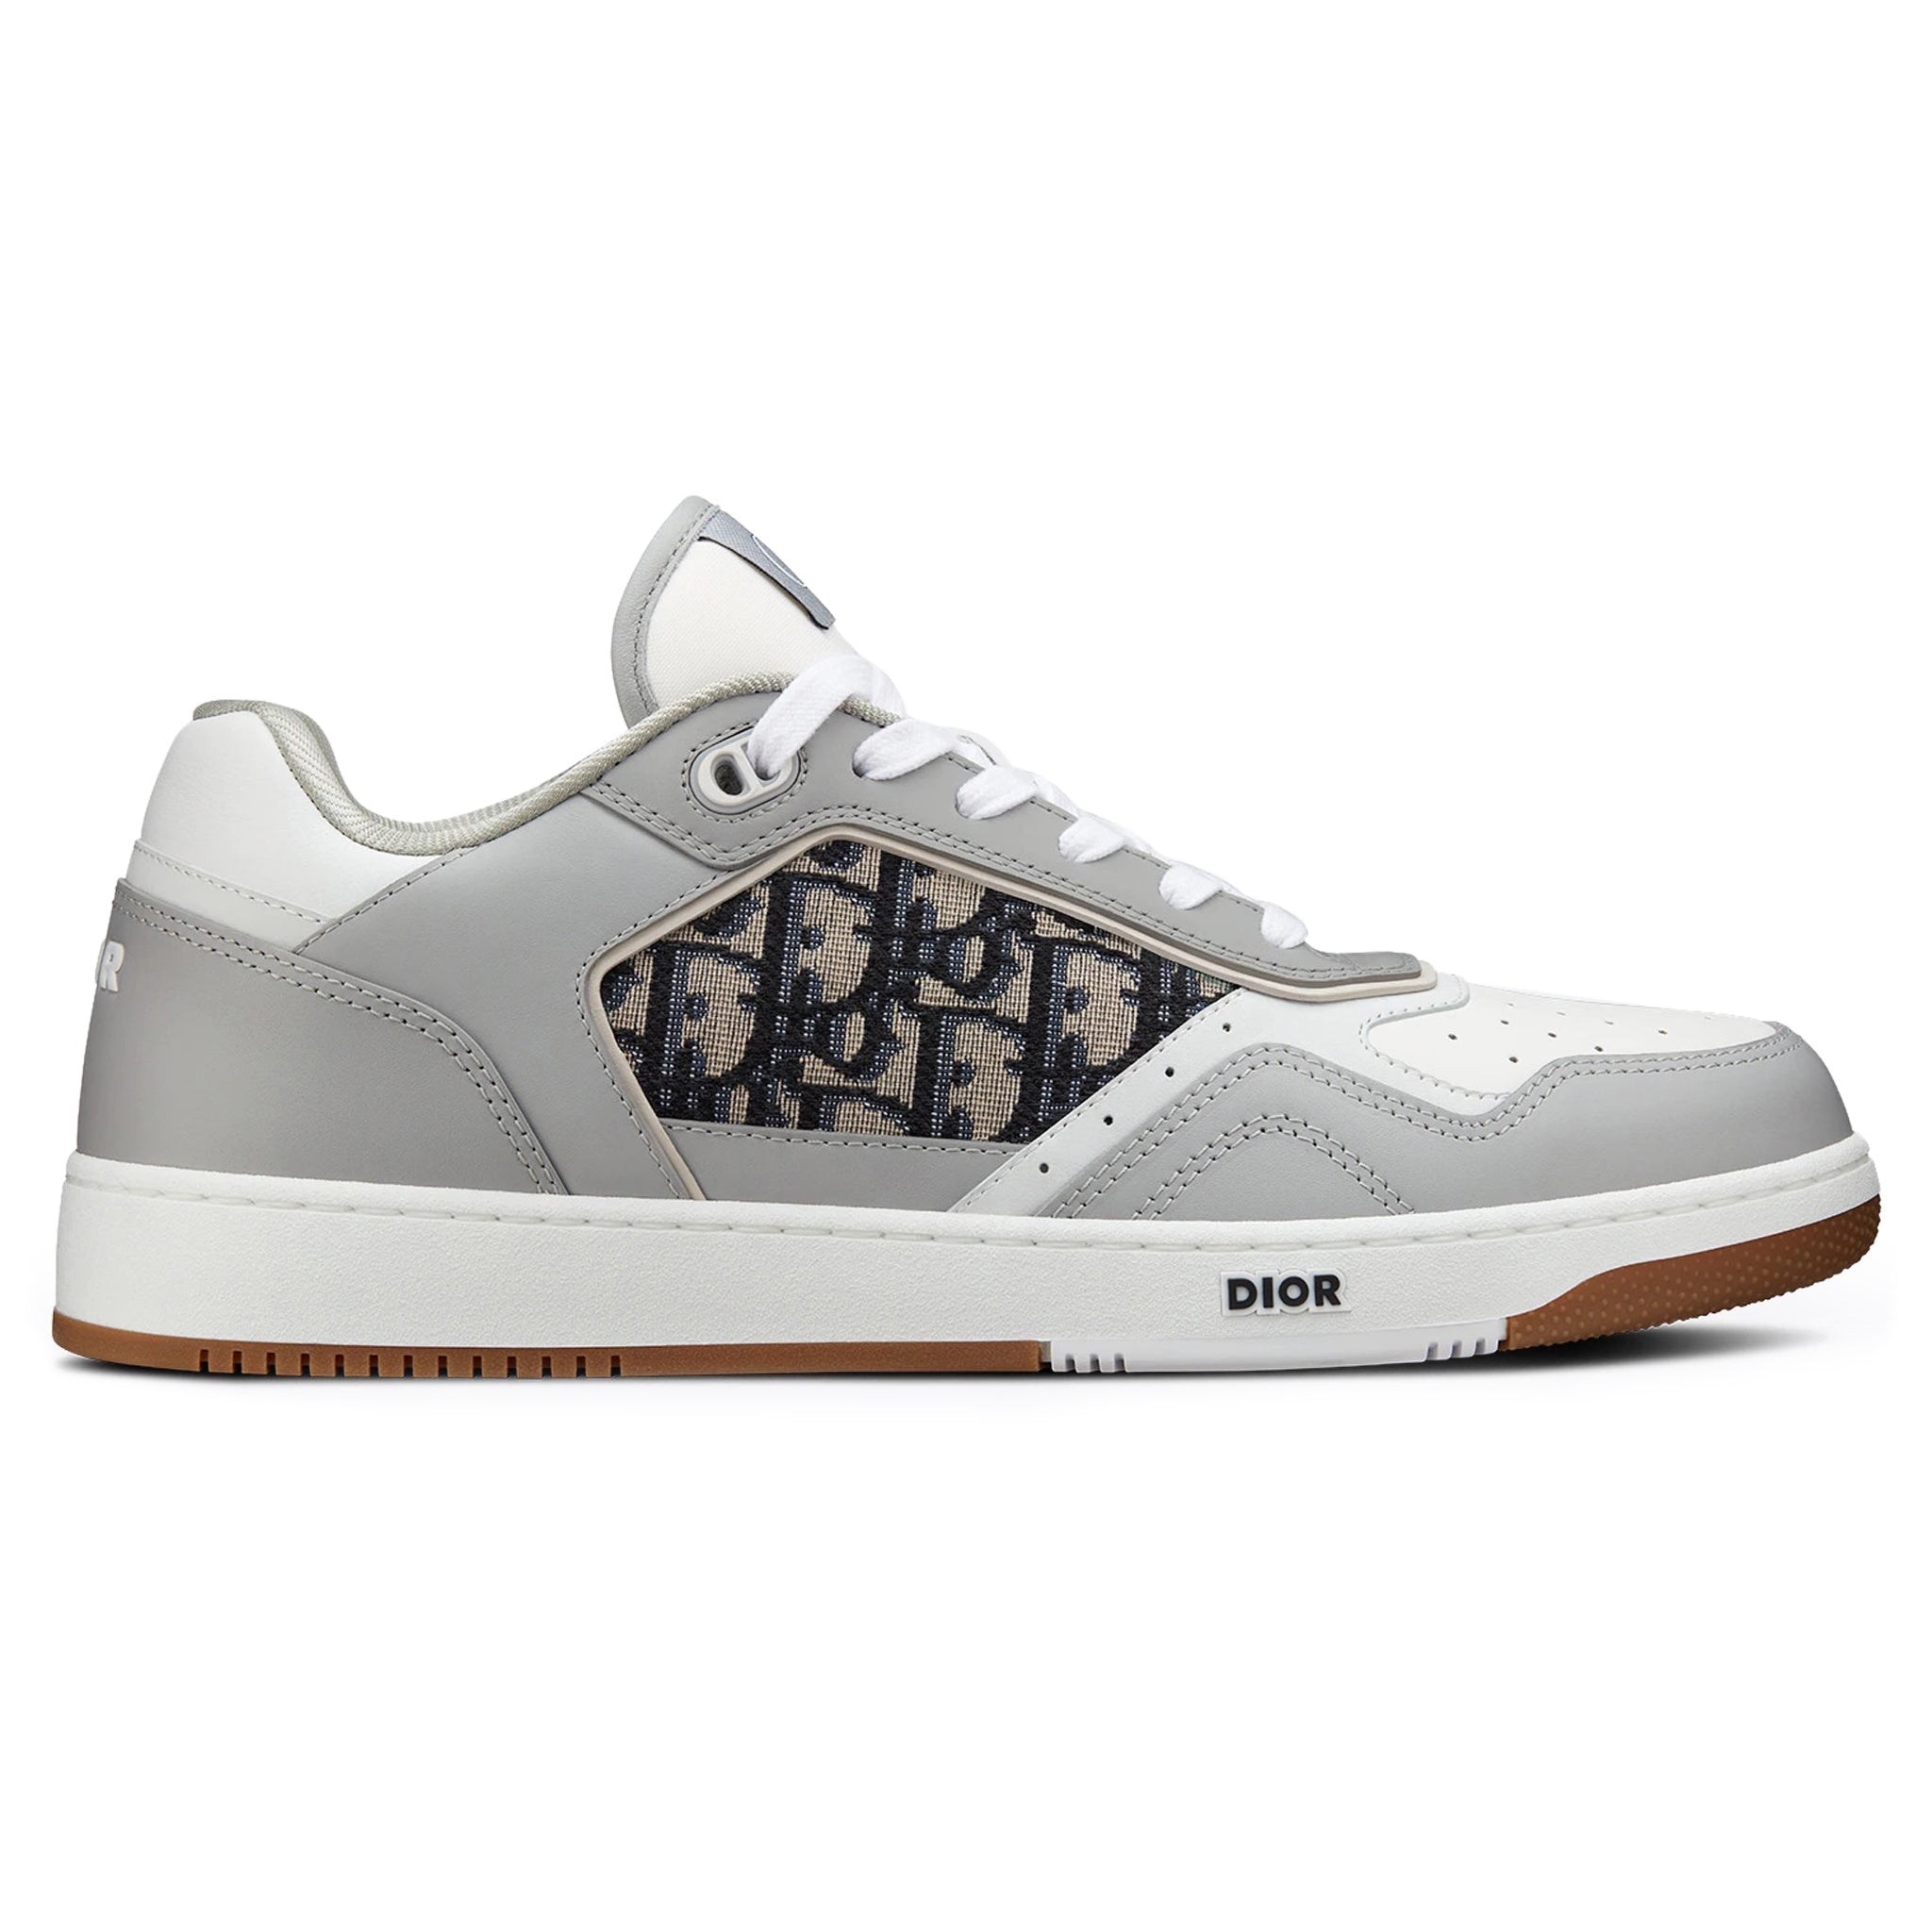 Dior - B22 Sneaker Beige Technical Mesh with Deep Gray and Brown Smooth Calfskin - Size 47 - Men